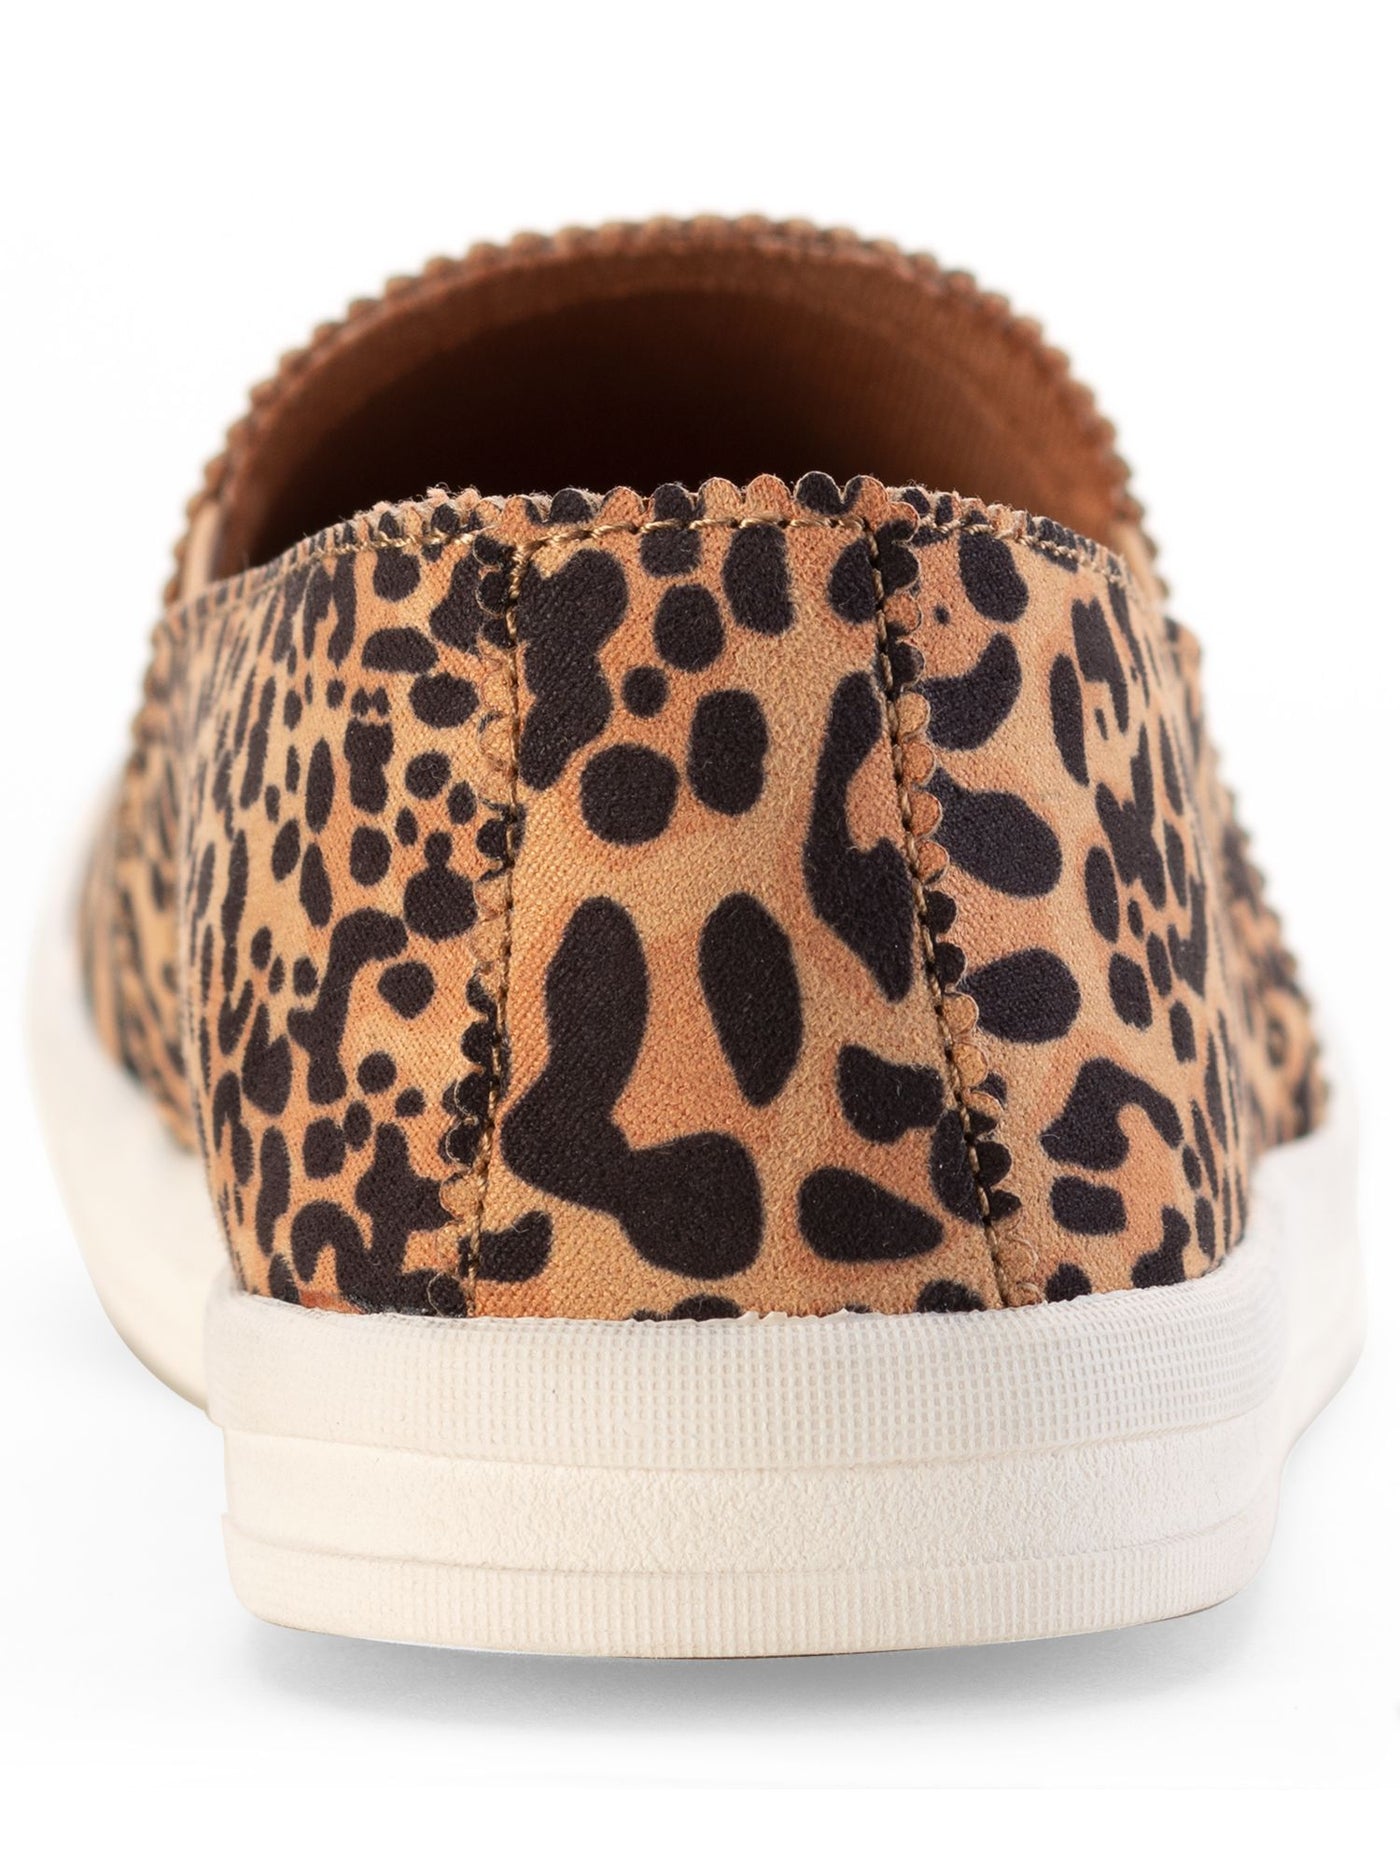 SUN STONE Womens Beige Animal Print Tiger Twin Side Gore Scalloped Cushioned Mariam Round Toe Platform Slip On Athletic Sneakers Shoes 5 M